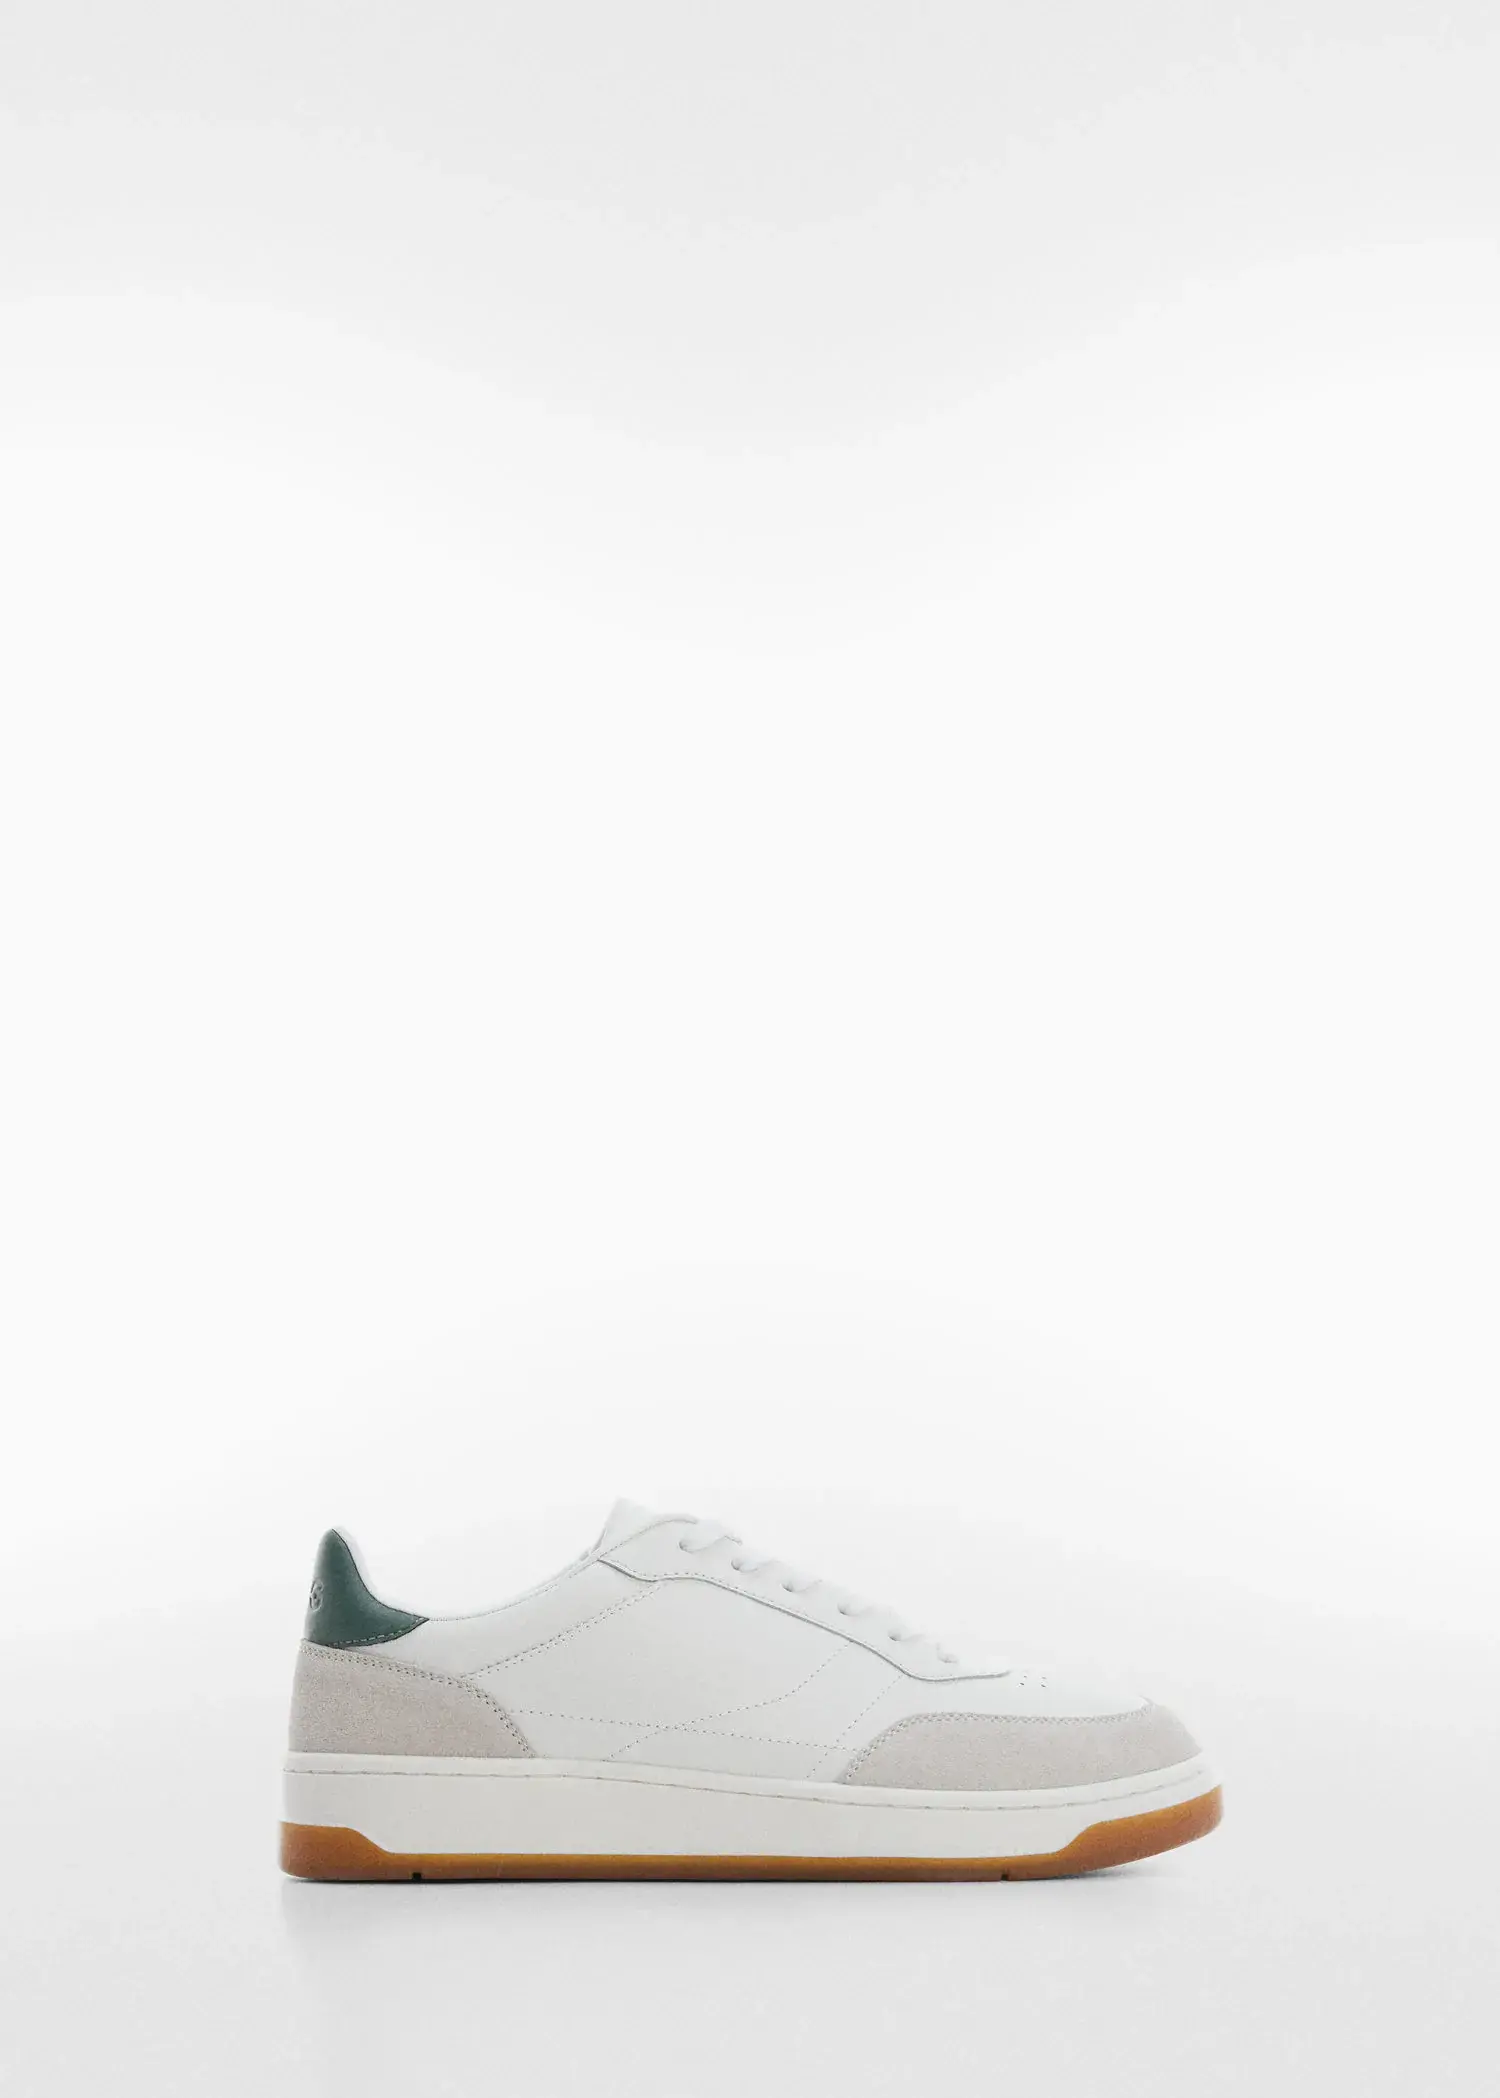 Mango Leather mixed sneakers. a pair of white shoes with a green sole. 